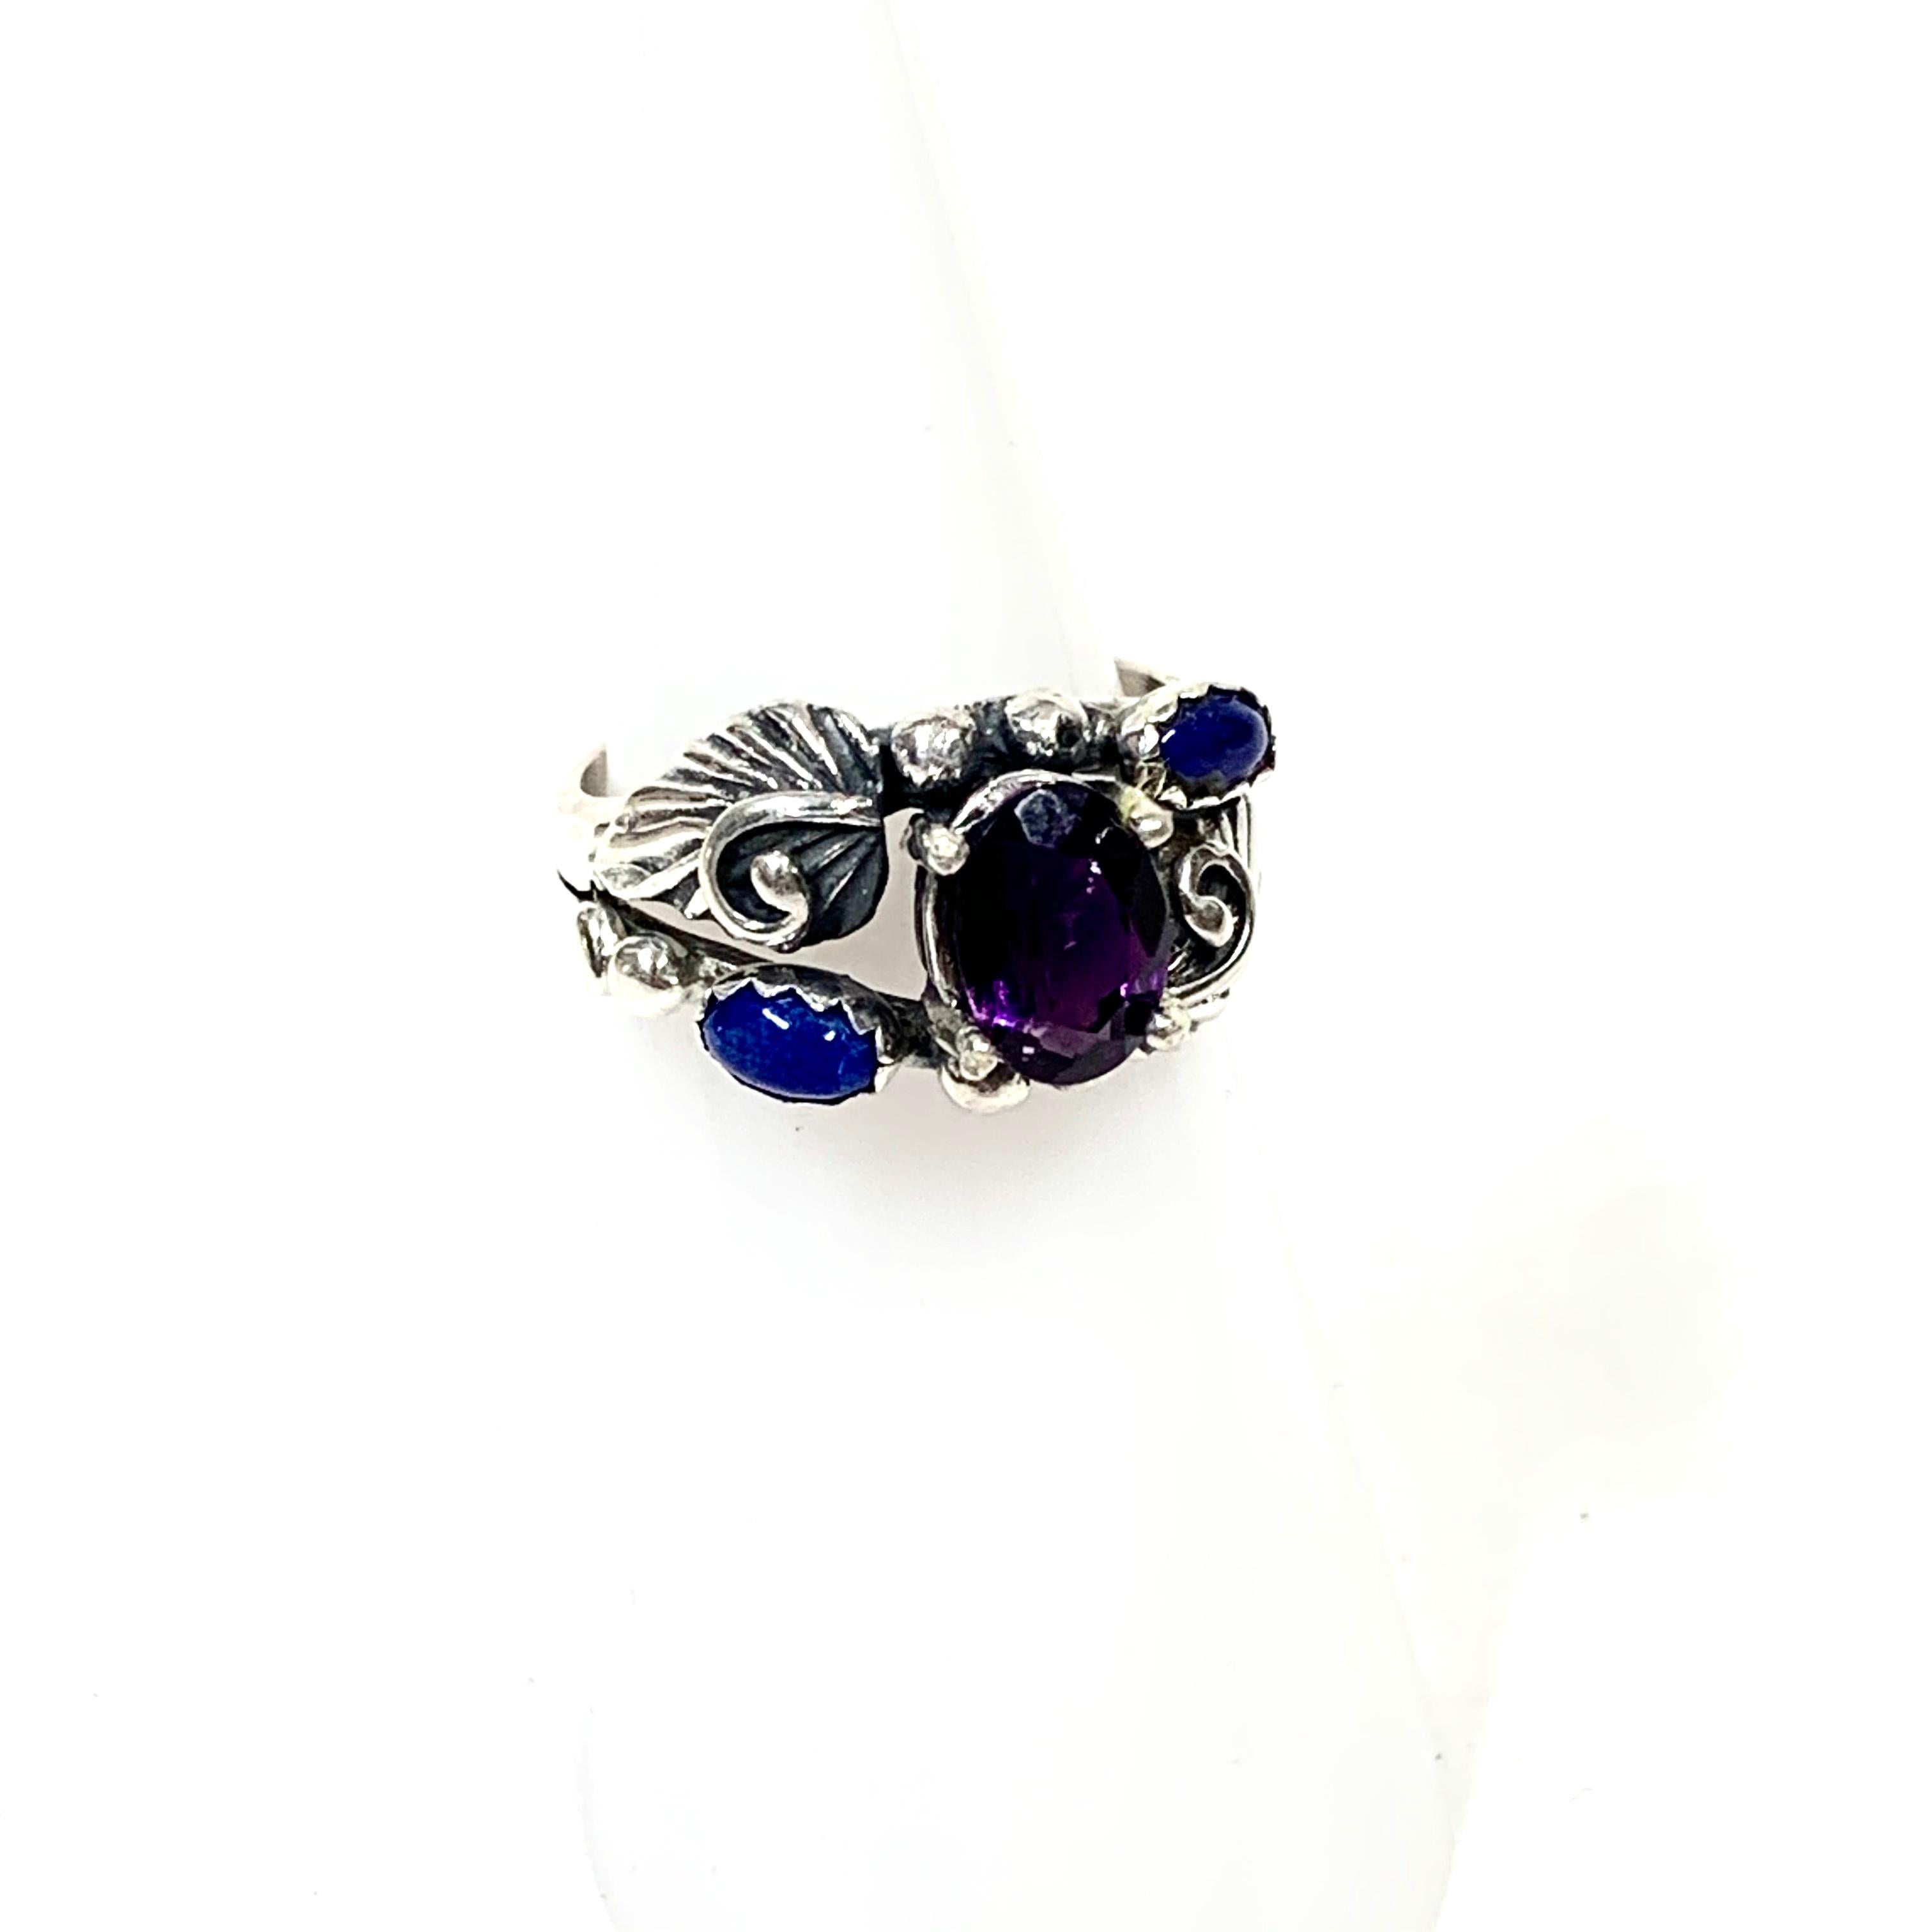 Y Navajo Sterling Silver Lapis Lazuli, Amethyst 4.4 Gr. Ring CCRS27

New Vintage Navajo Ring adorned with Amethyst, Lapis Lazuli stones handcrafted by the reknowned artist Y

•Measurements: 0.7 x 0.4 inches

•Weight: 4.4 gr.

•Size: